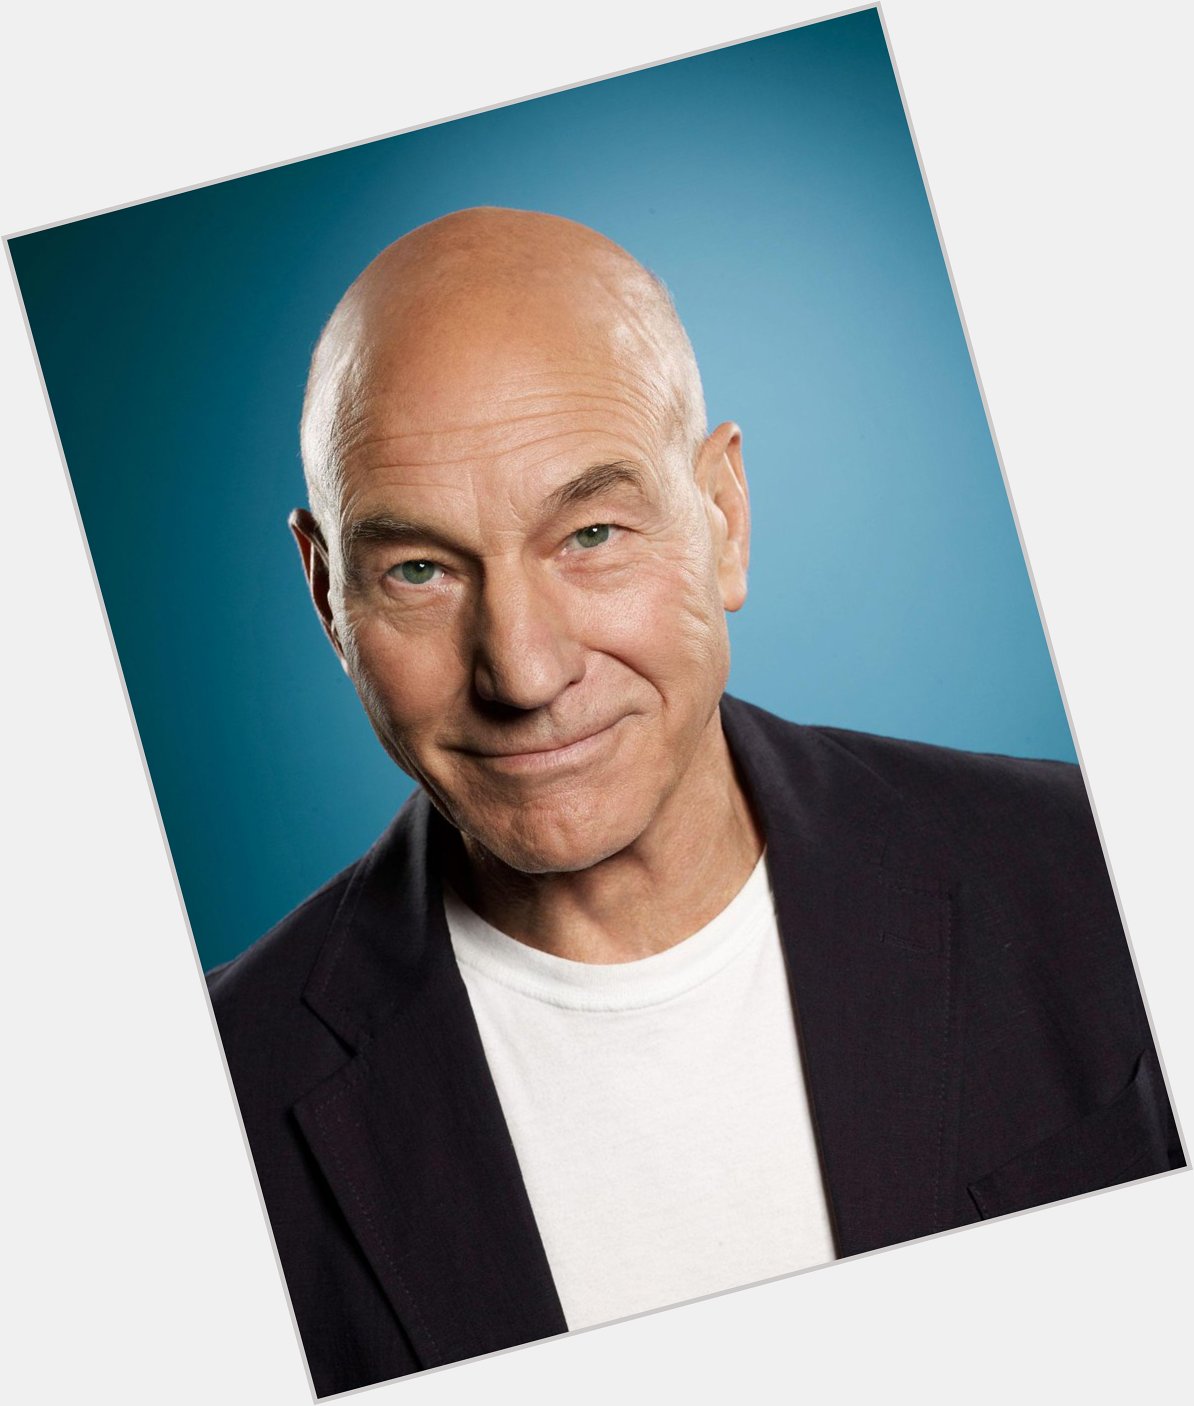 Happy Birthday Sir Patrick Stewart Thank you for decades of entertainment, we love you.
Keep it coming! 